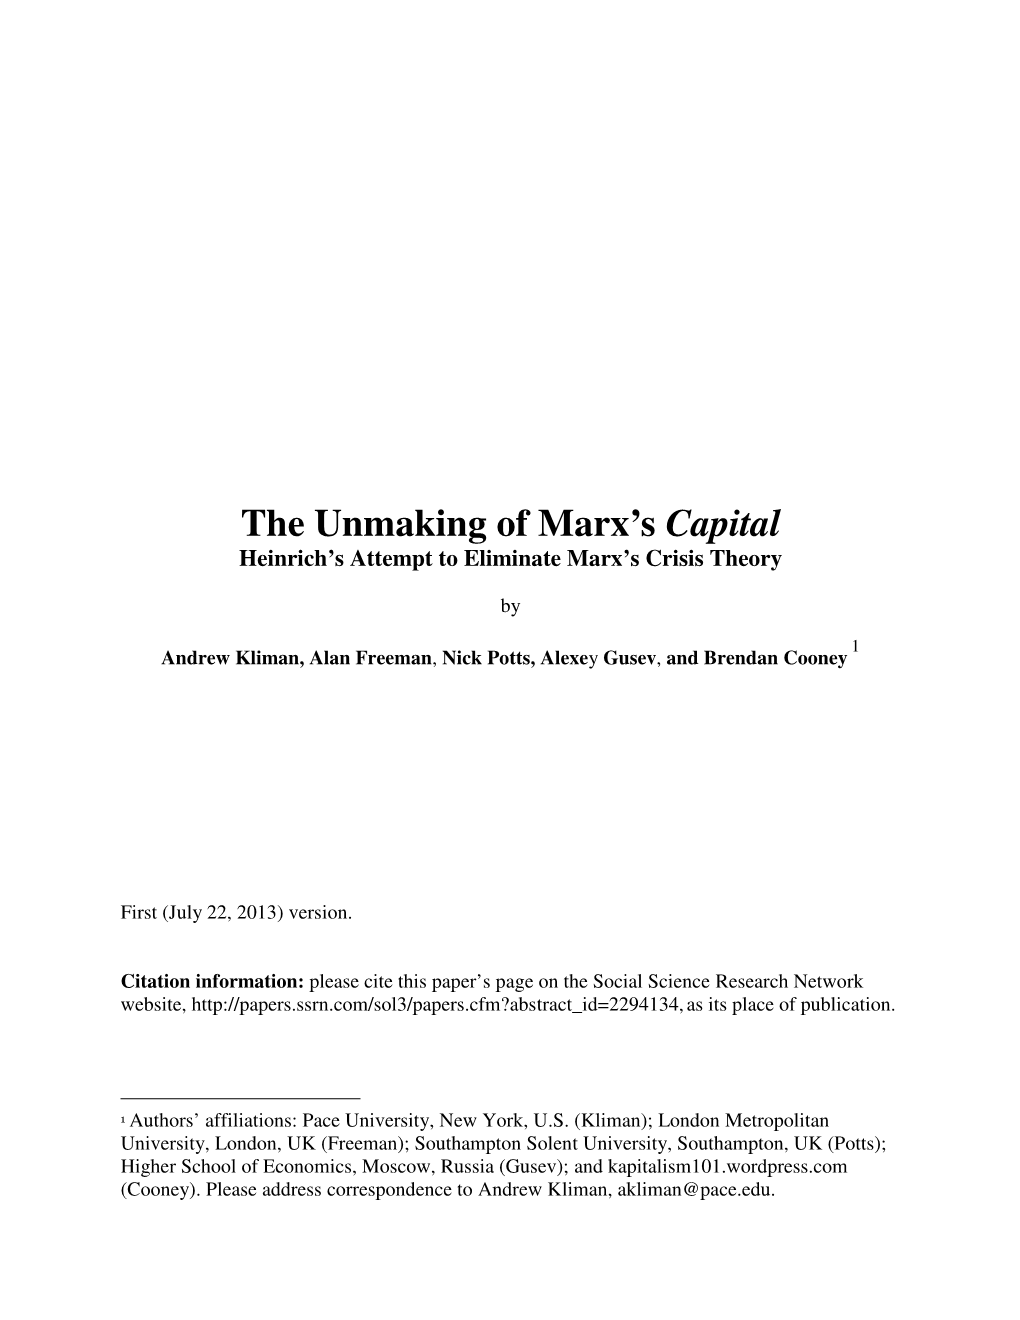 The Unmaking of Marx's Capital